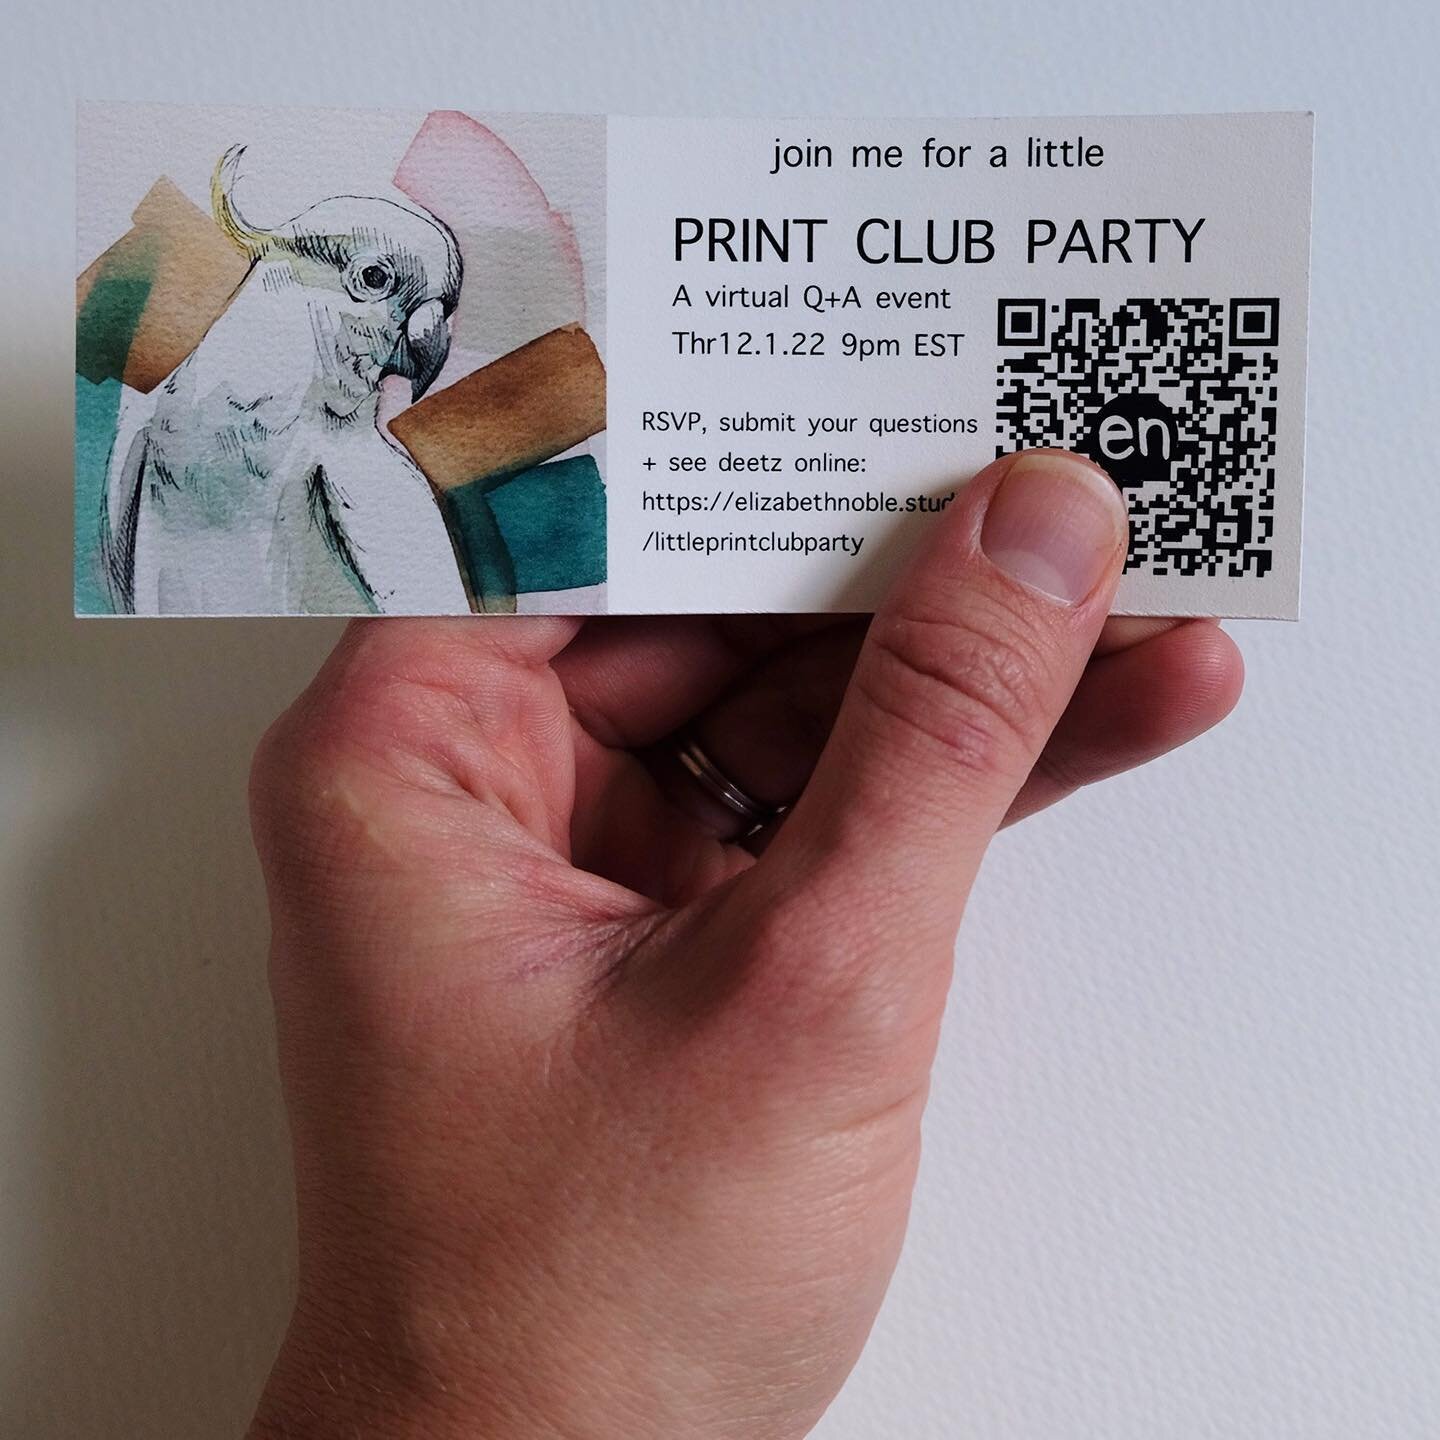 November&rsquo;s Print Club is in the mail. Aaaaand I&rsquo;m doing a little something different, I&rsquo;m hosting a little online get-together for all you subscribers. Look for your ticket in your letter. Hope you can come!
.
Thanks to everyone who